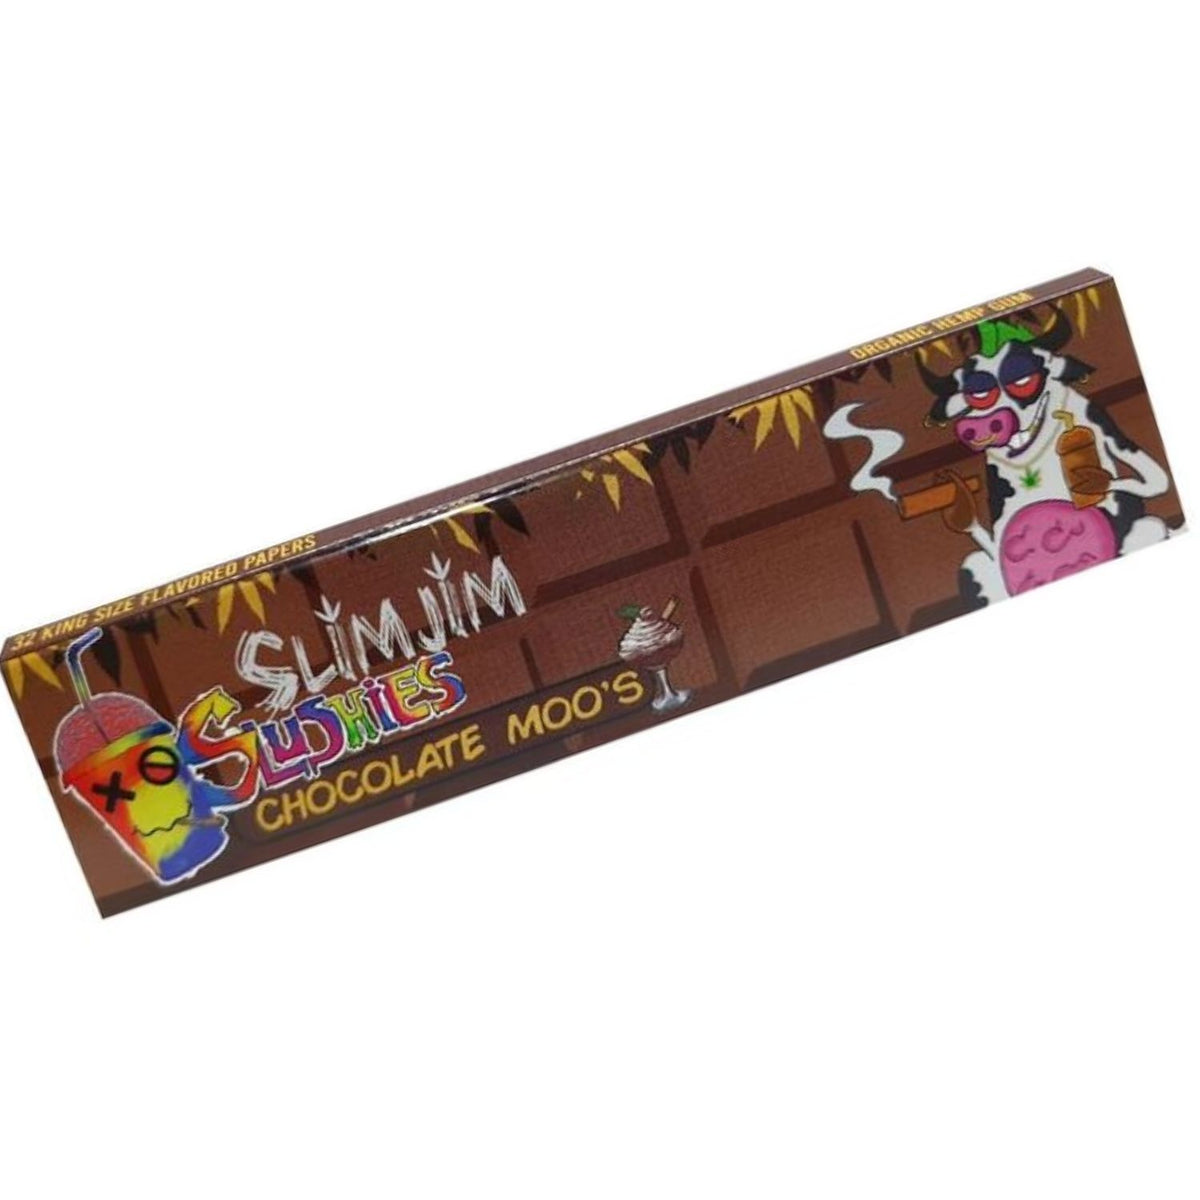 Slimjim Chocolate Moo Flavored King Size Rolling Paper